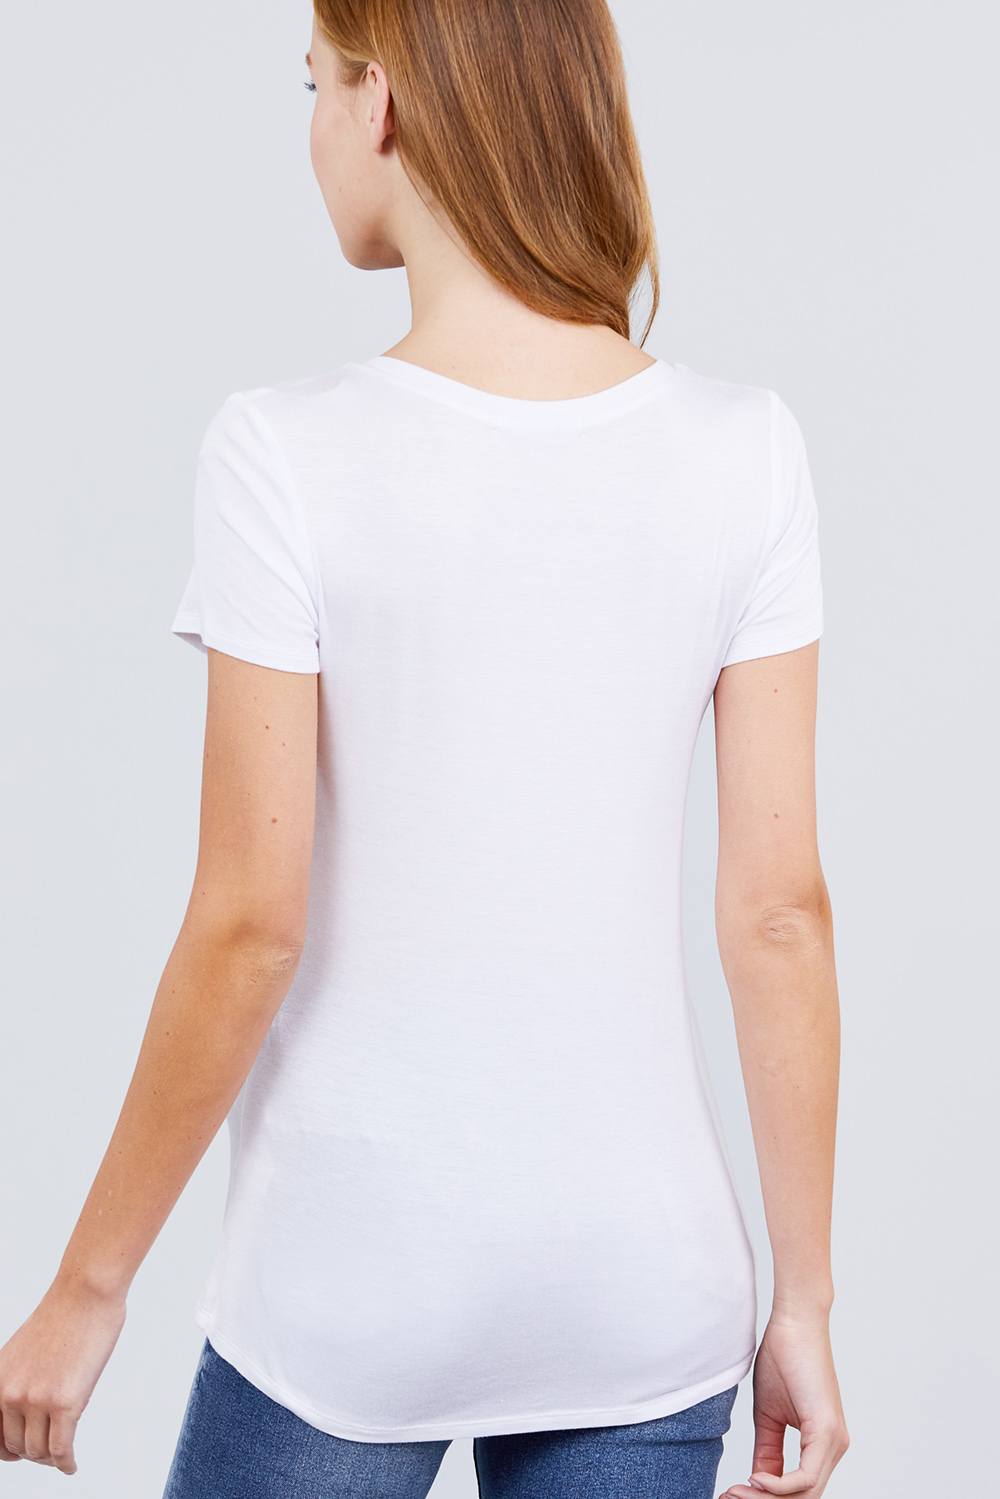 Short Sleeve Scoop Neck Top With Pocket - Fashion Quality Boutik